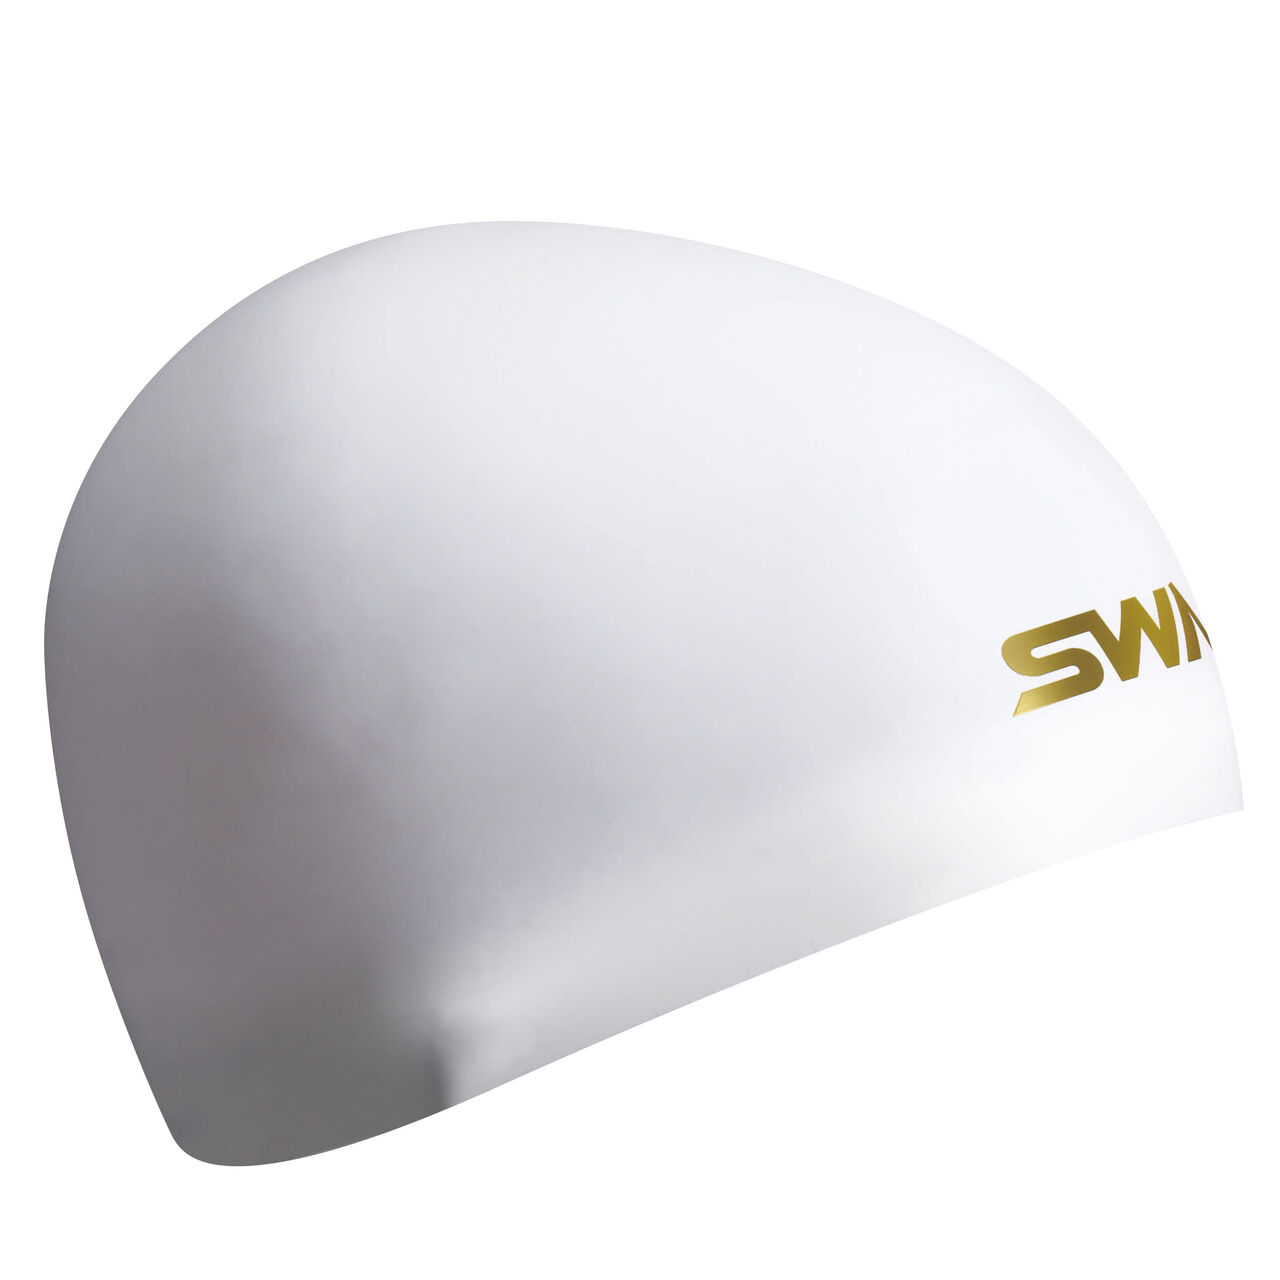 SA-10S White silicone swim cap,Opt1, large image number 0